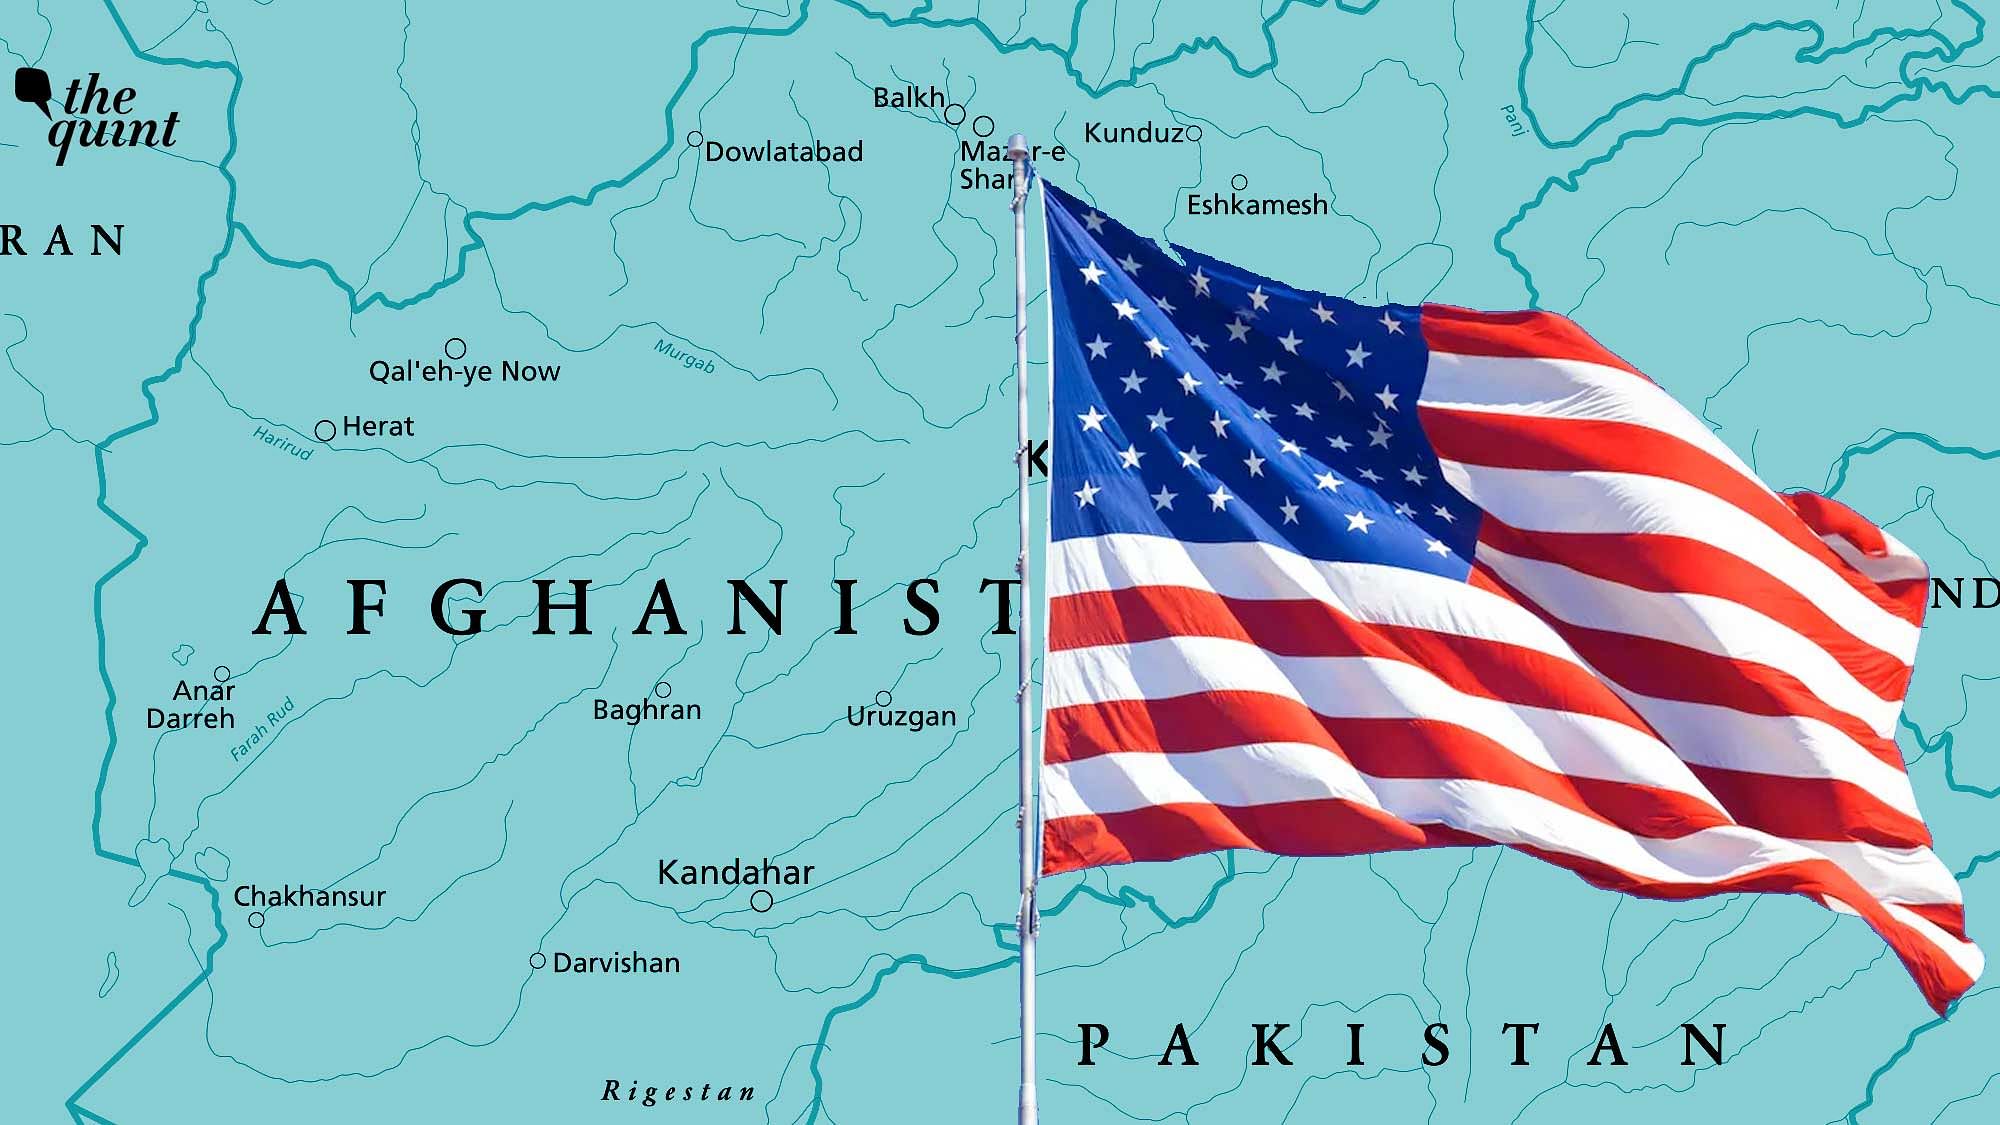 Image of American flag against the Afghanistan map used for representational purposes.